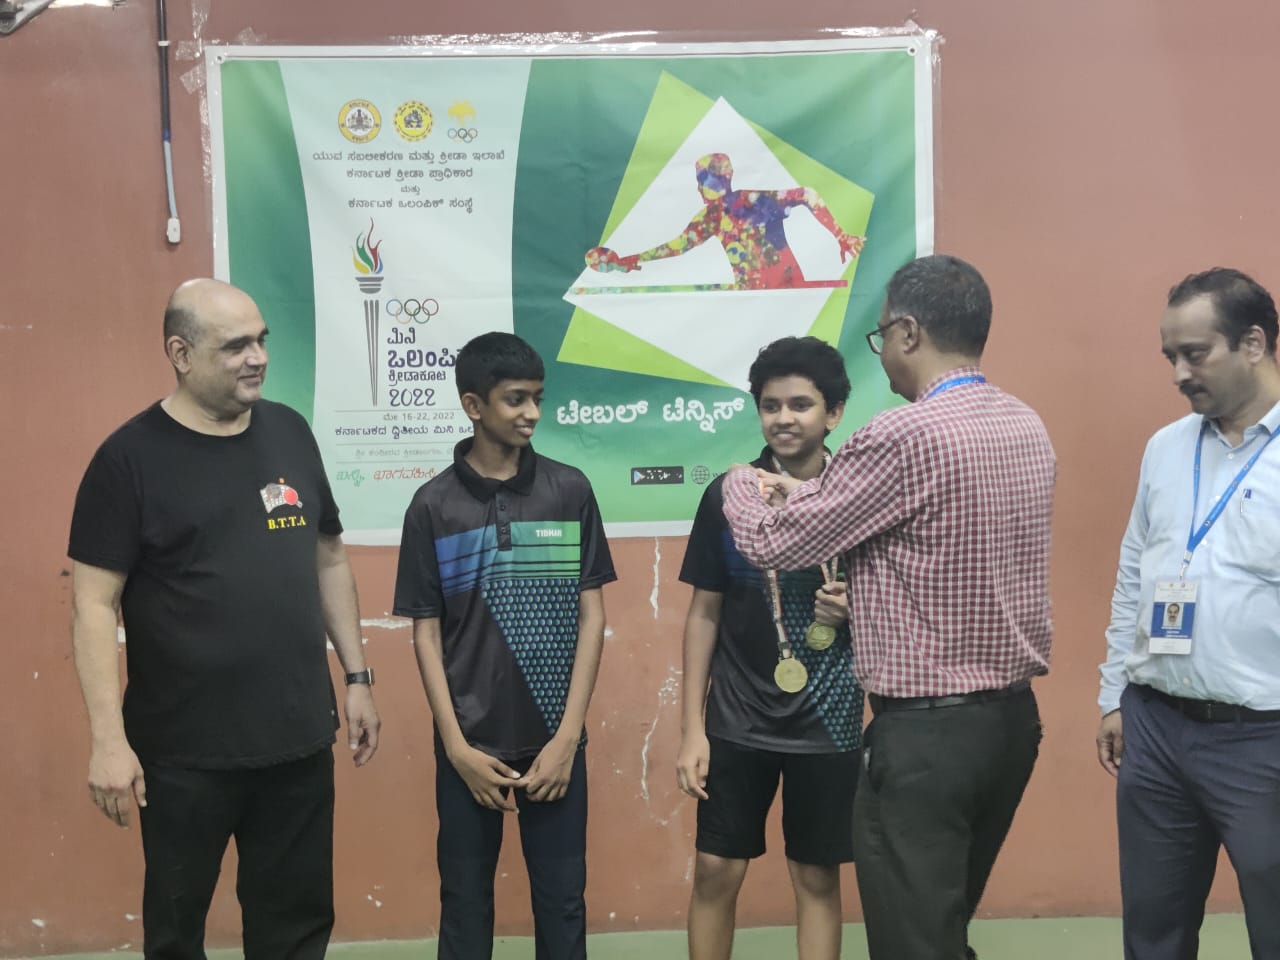 <strong>Siddhant Vasan</strong>, along with his teammate, <strong>Teshub Dinesh</strong>, participated in State Level Under 15 (Boys) Karnataka Mini Olympics and won a gold medal. The event was held in May 2022. He also bagged a <strong>bronze medal. </strong>Siddhant participated in the All India Level Table Tennis Tournament (Central Zone) and reached <strong>round 32</strong>. This was an event for Under 15 boys and was held in Indore between 22<sup>nd</sup> and 25<sup>th</sup>May 2022.In the National Grand Finale (for Under 15 boys) that was held this week, Siddhant qualified for the Mains and the match ended in a <strong>draw</strong> (he played till round 64).Heartiest congratulations to Siddhant for this glorious array of victories!